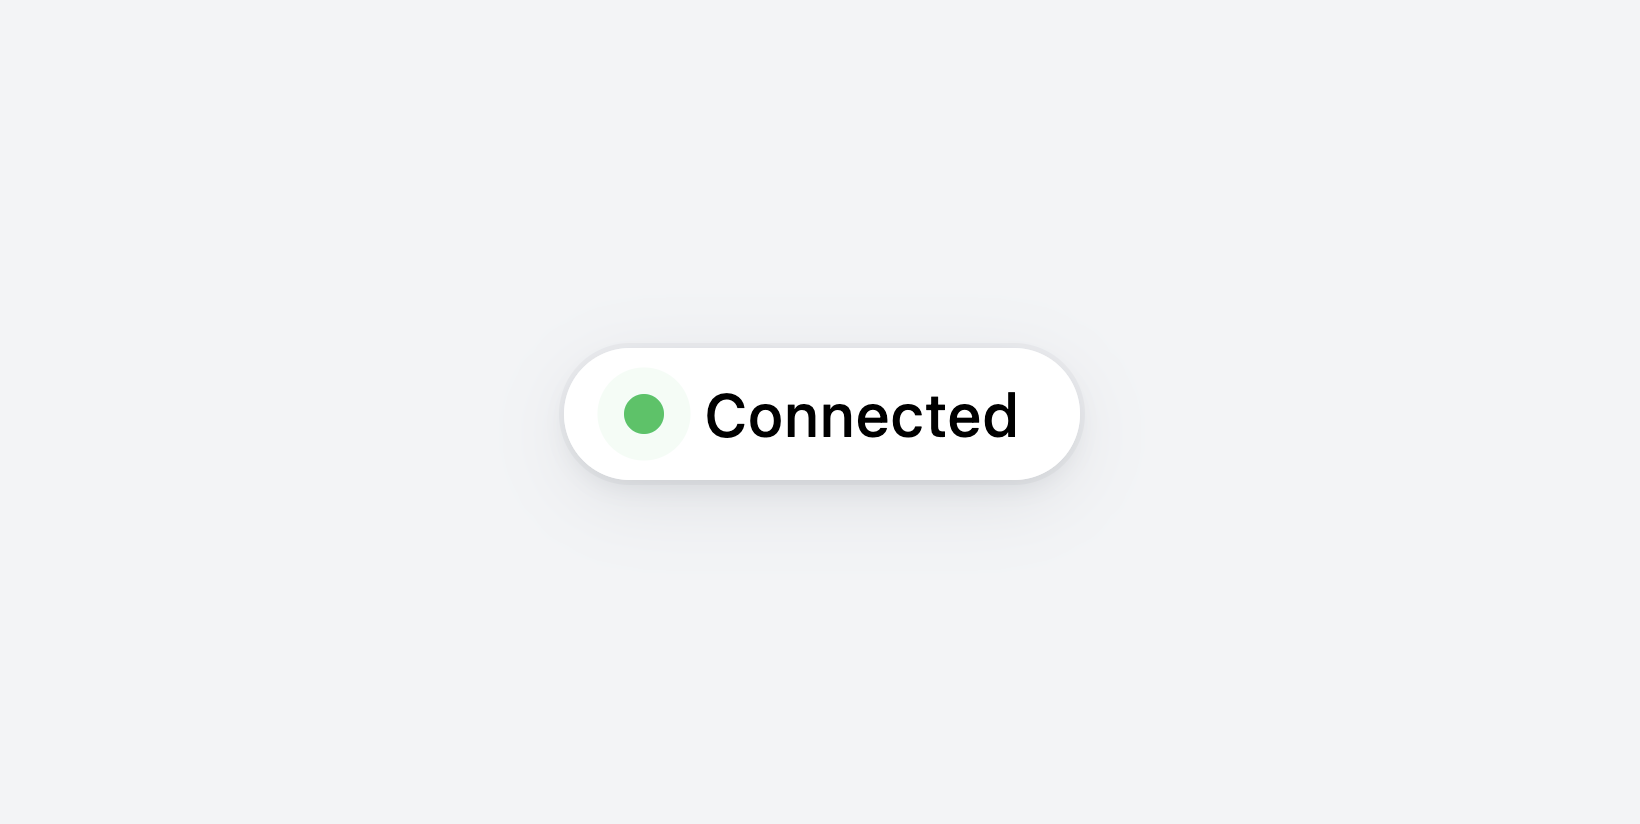 Connected status badge